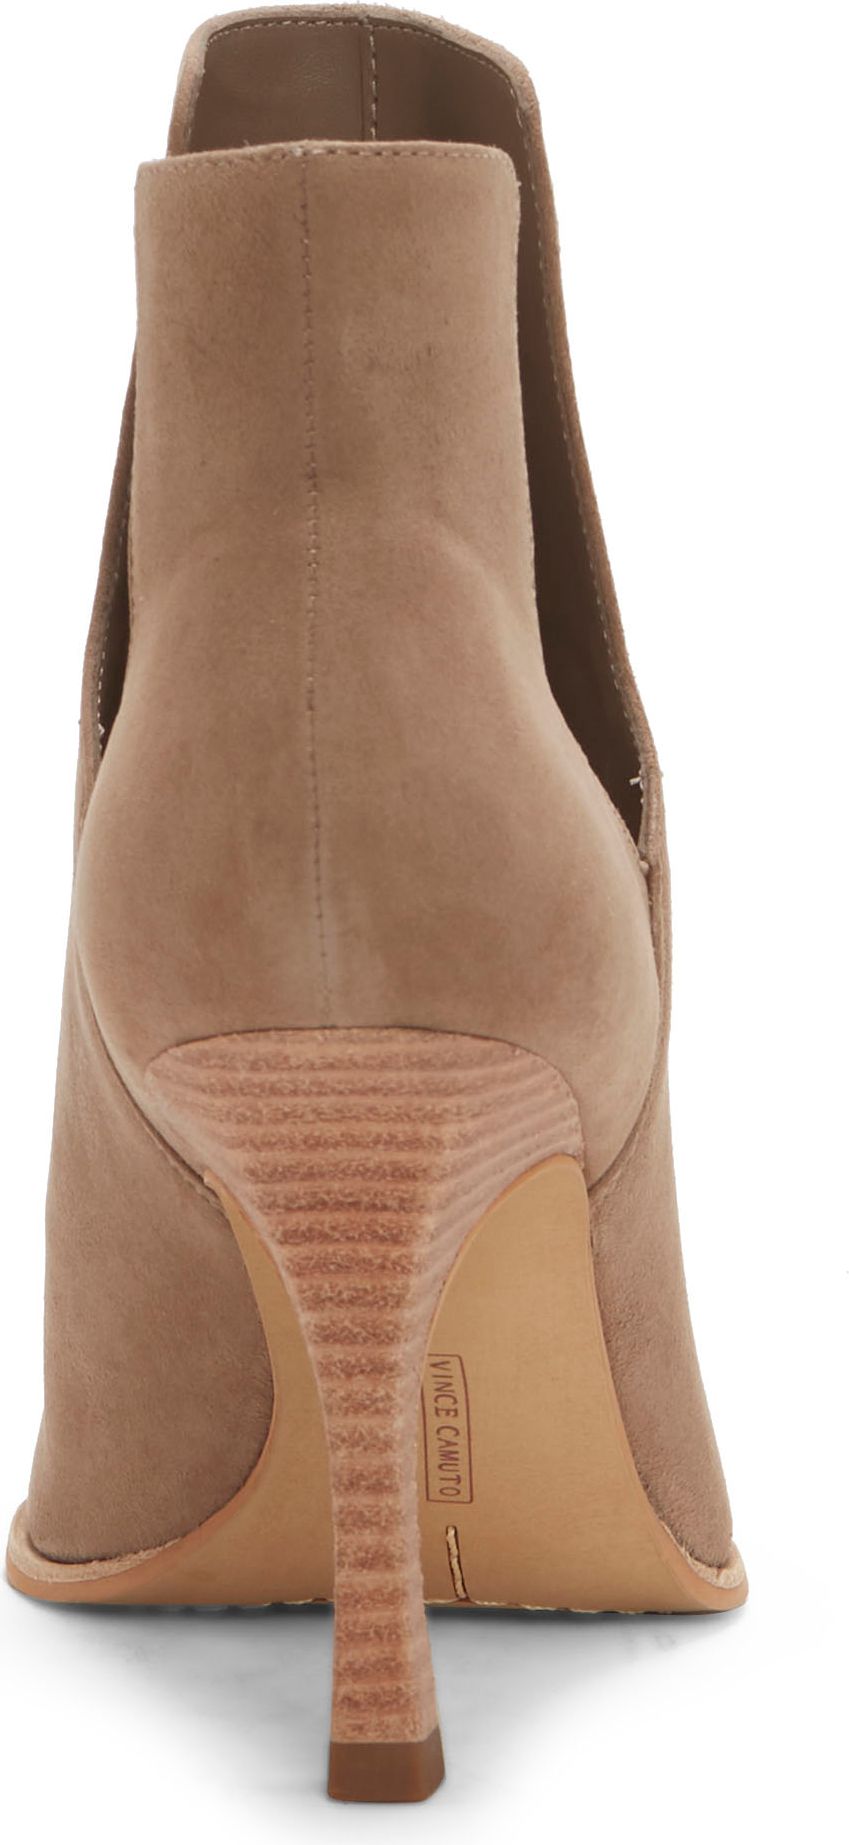 Vince Camuto Boots Frendin True Suede Tuscan Taupe